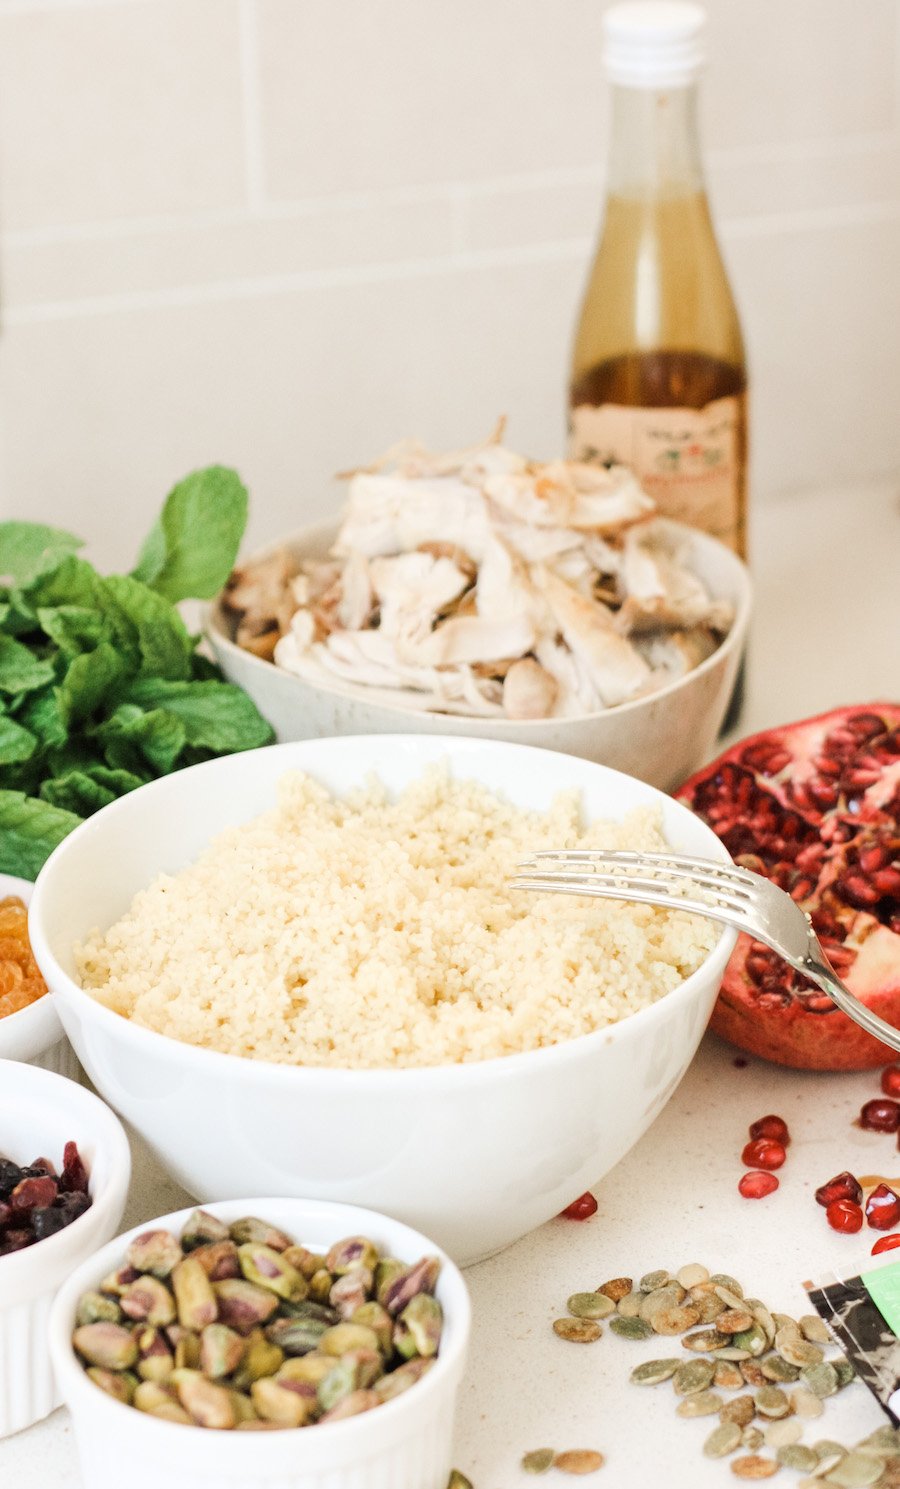 Bejewelled Turkey, Pistachio and Mint Couscous ingredients from side